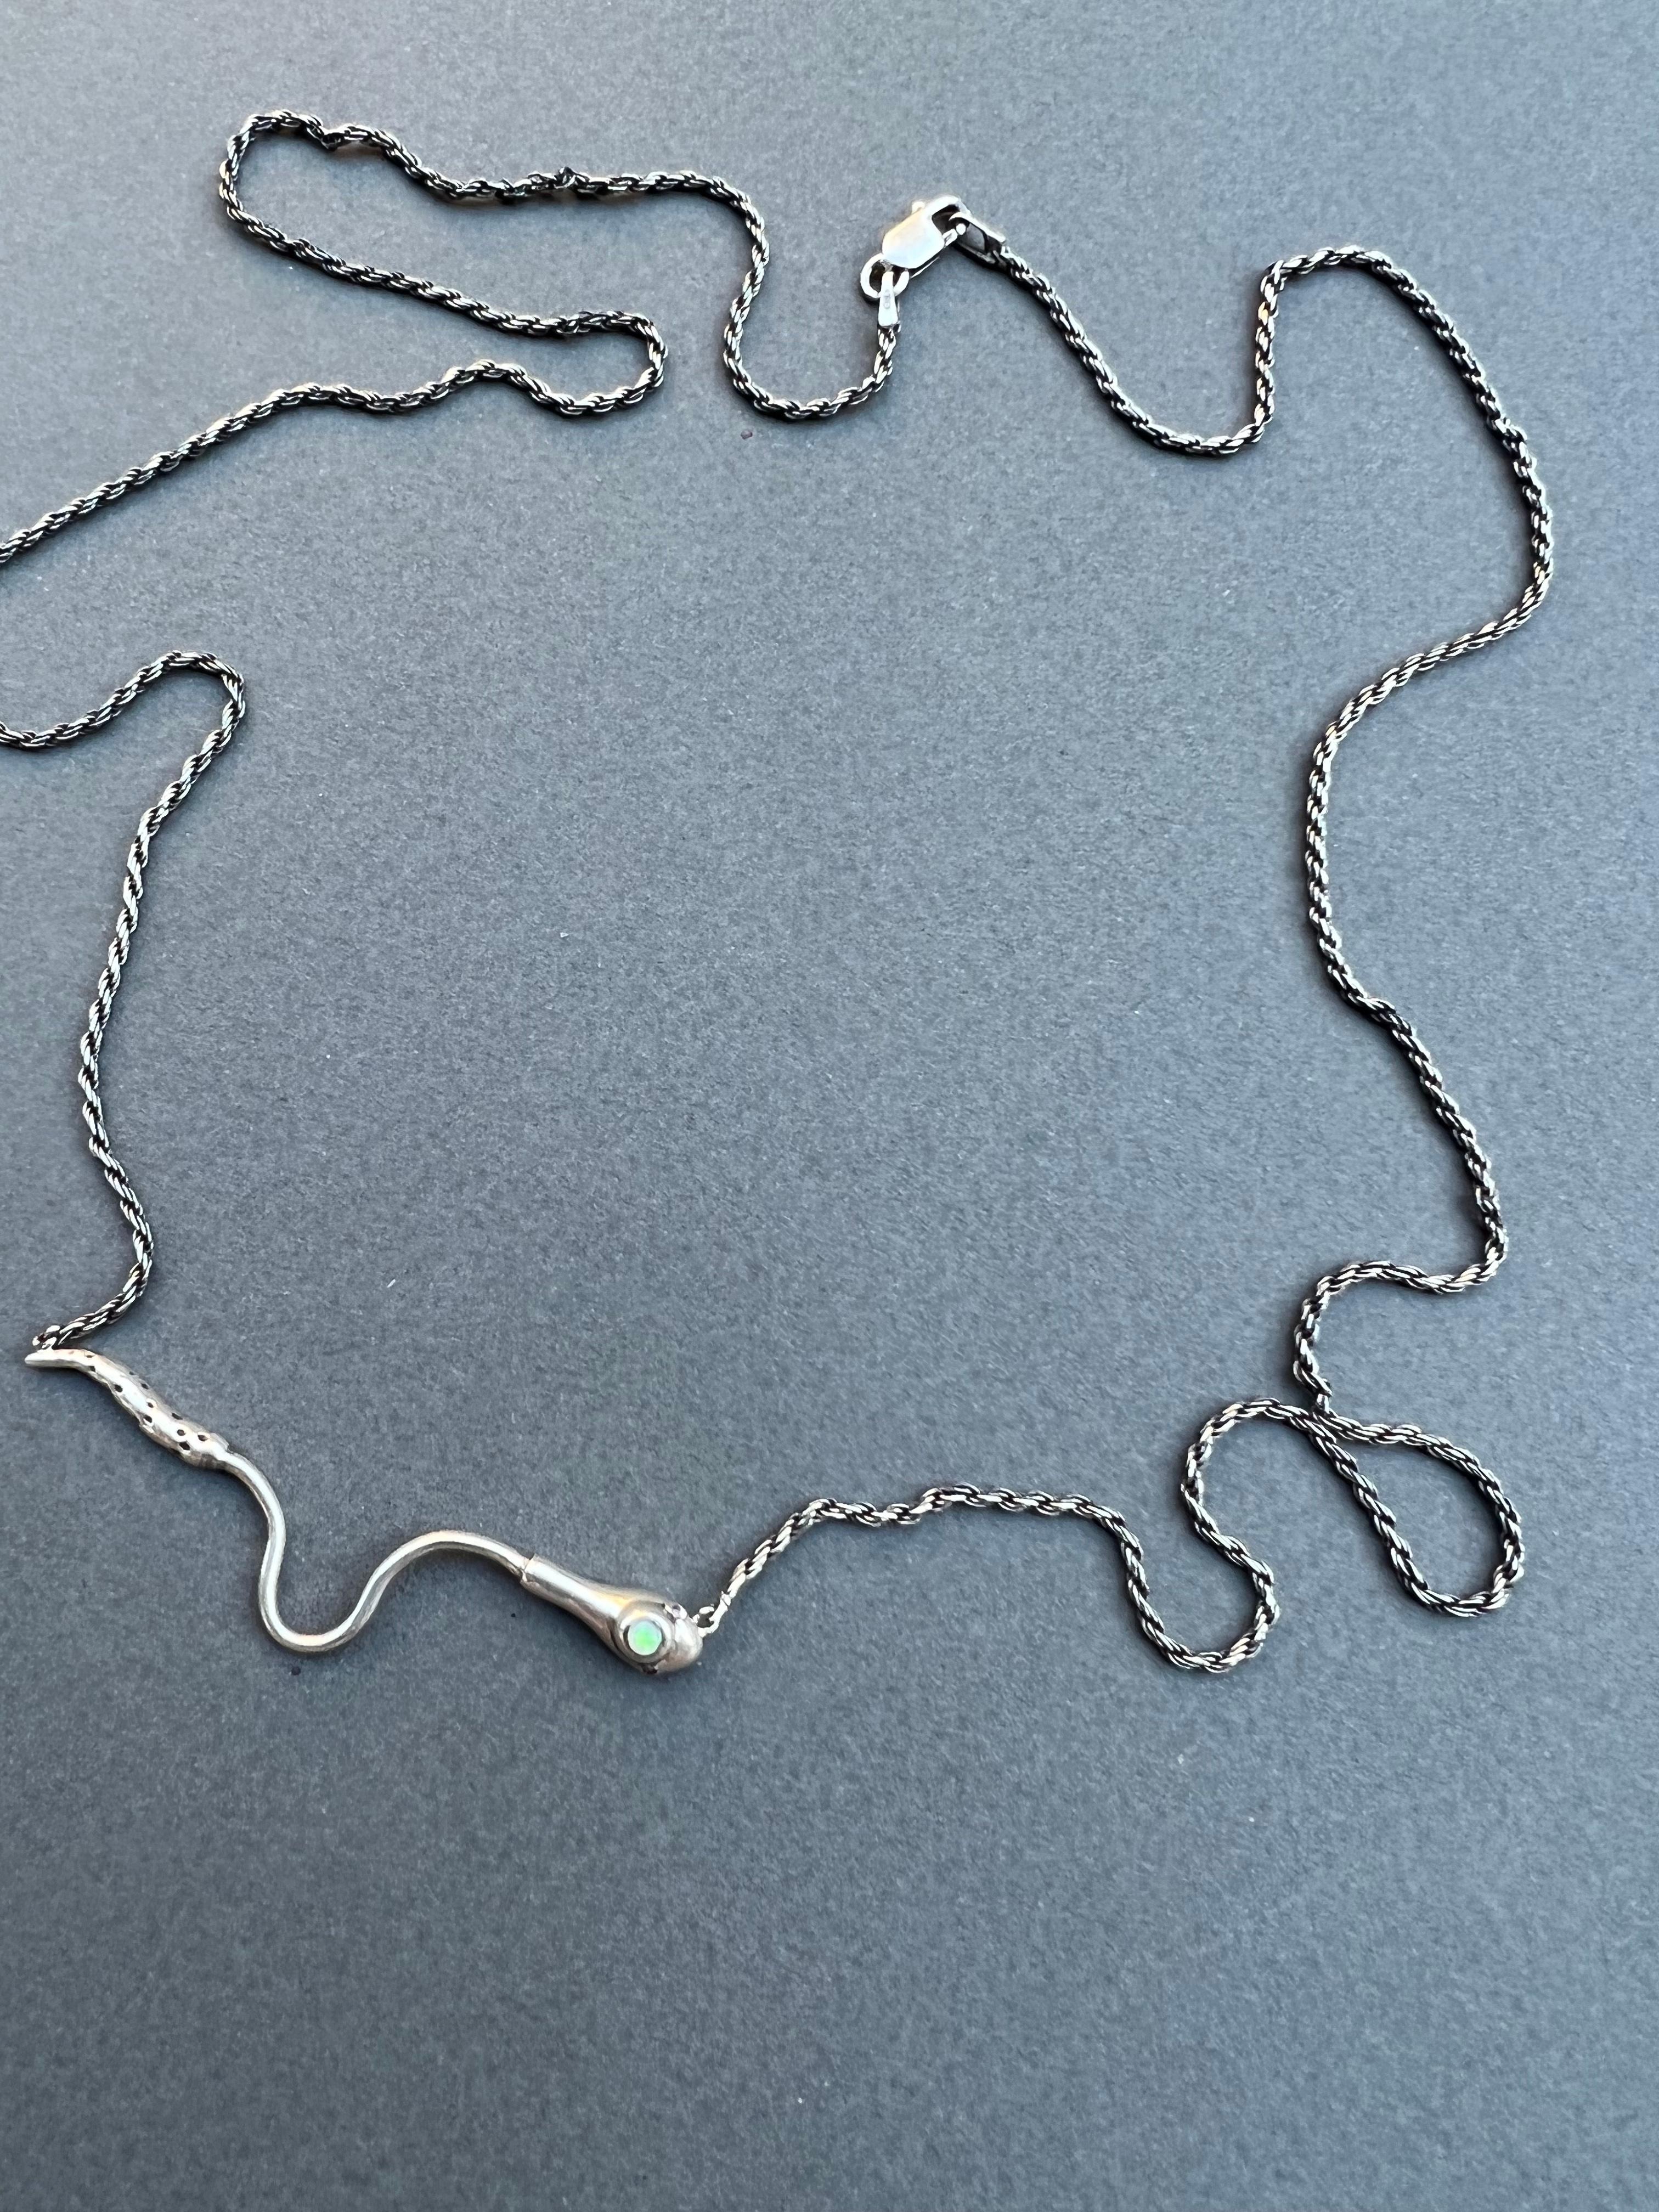 Opal Ruby Snake Necklace Italian Silver Chain J Dauphin For Sale 7